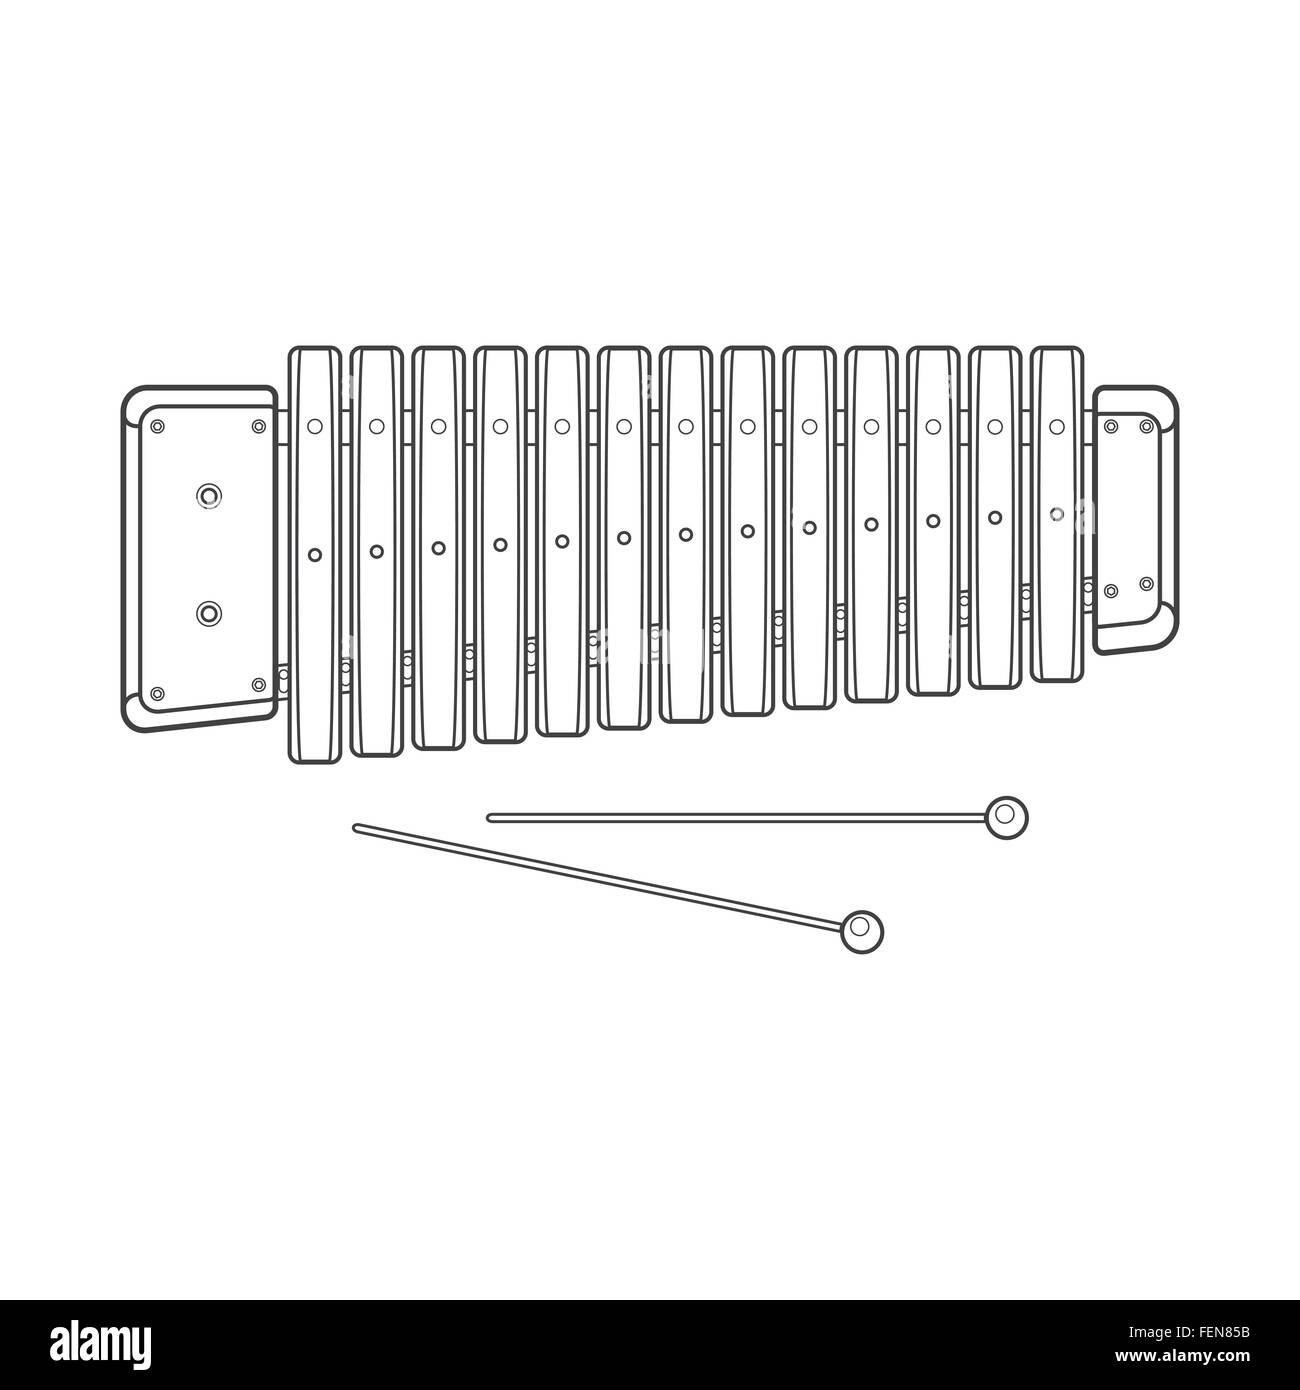 Xylophone sketch icon Royalty Free Vector Image